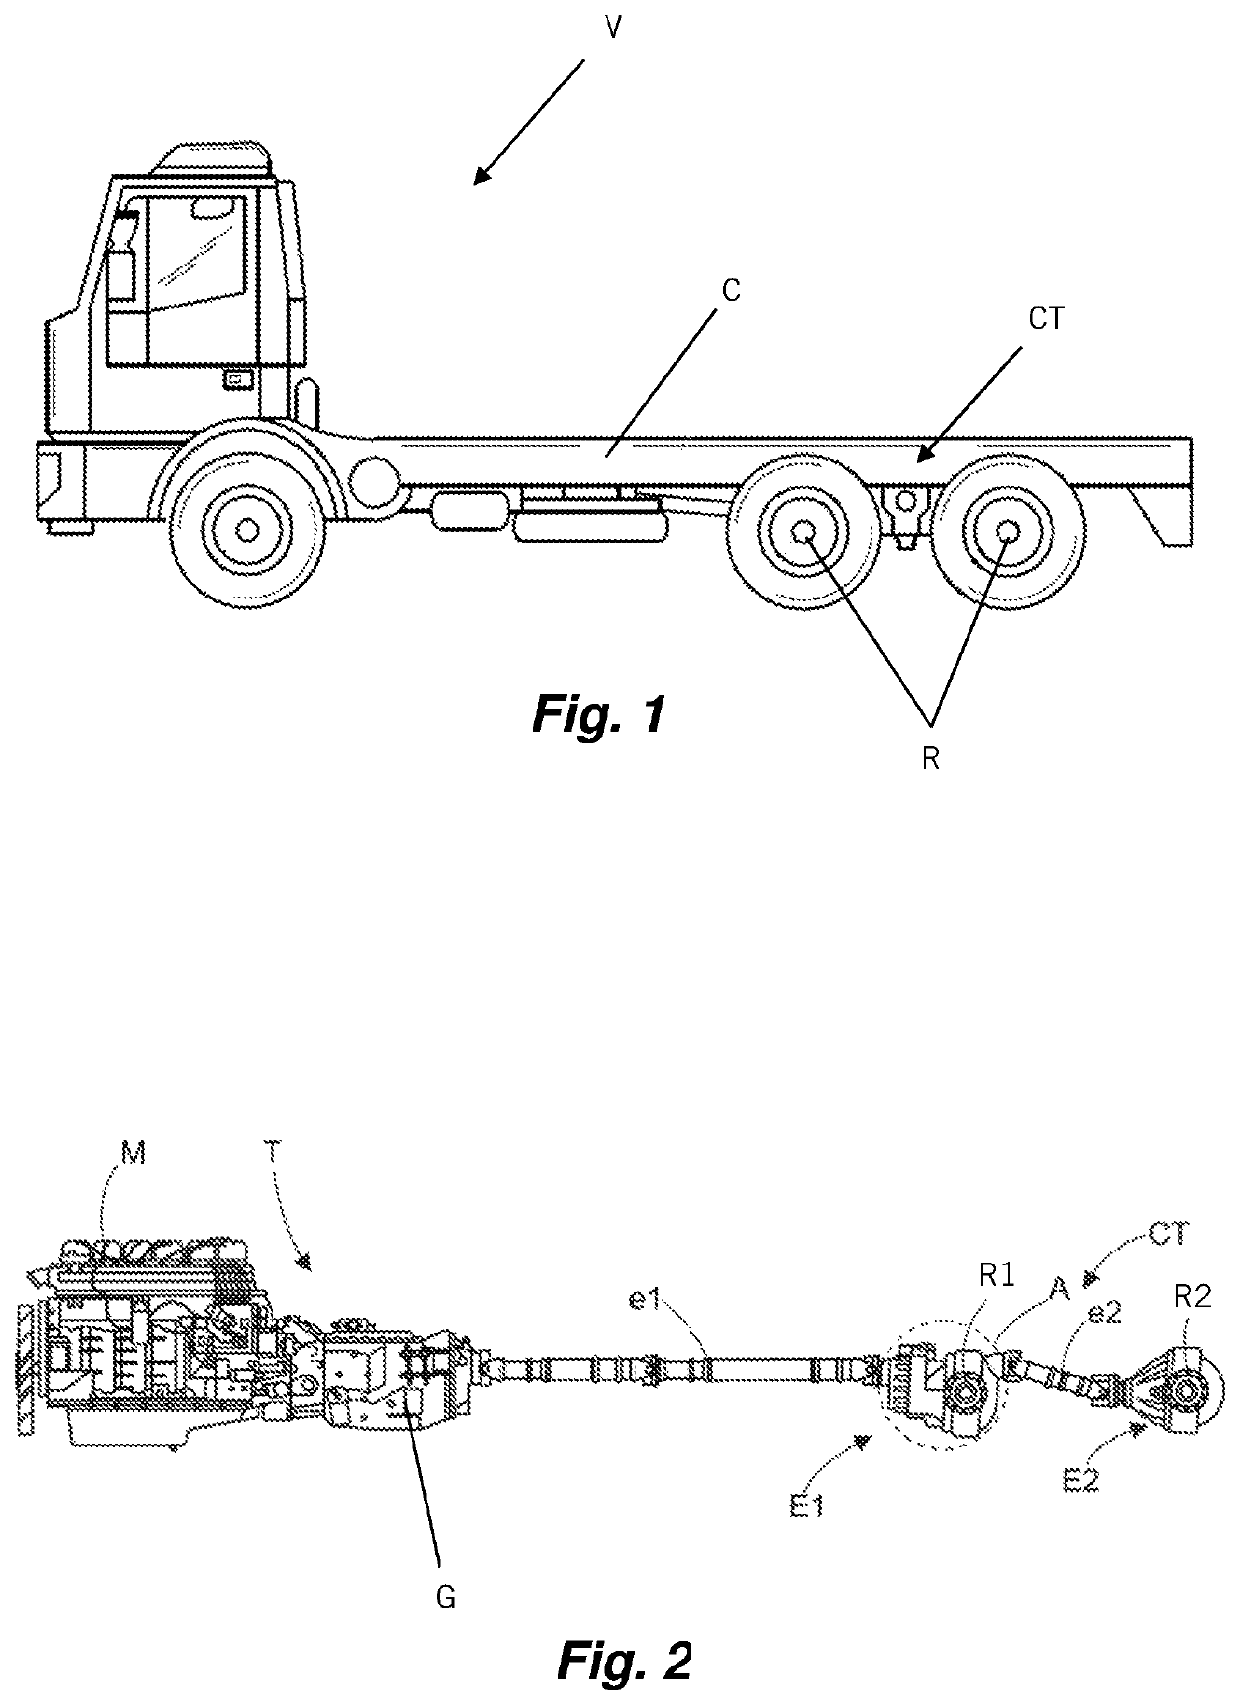 Power transmission assembly for tandem axles